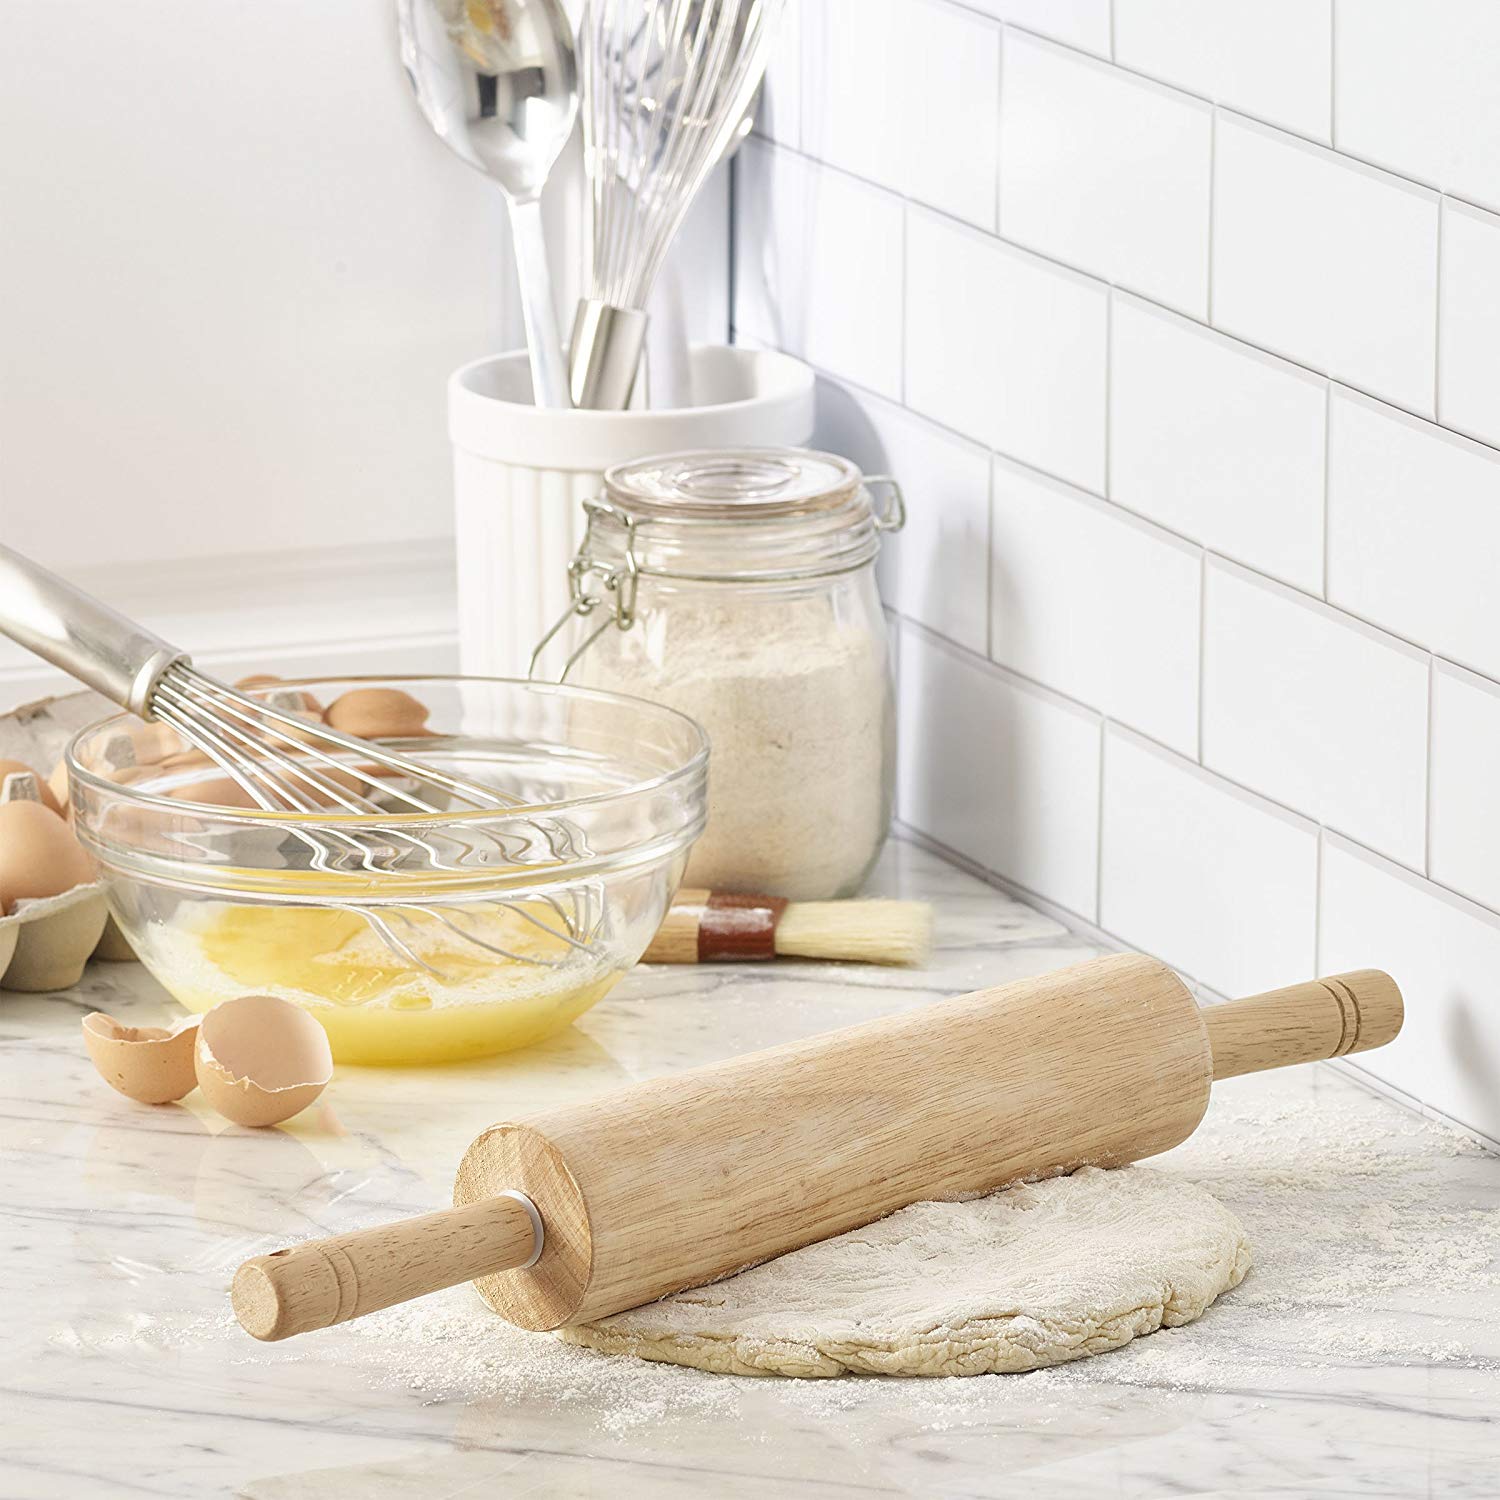 6.3 Inches Small Rolling Pin Handle Rolling Pin Dough Roller Essential Kitchen Utensil Tool for Fondant Pie 3 Pieces Wooden Mini Rolling Pins Pastry Pasta Bread Pizza Cookies 